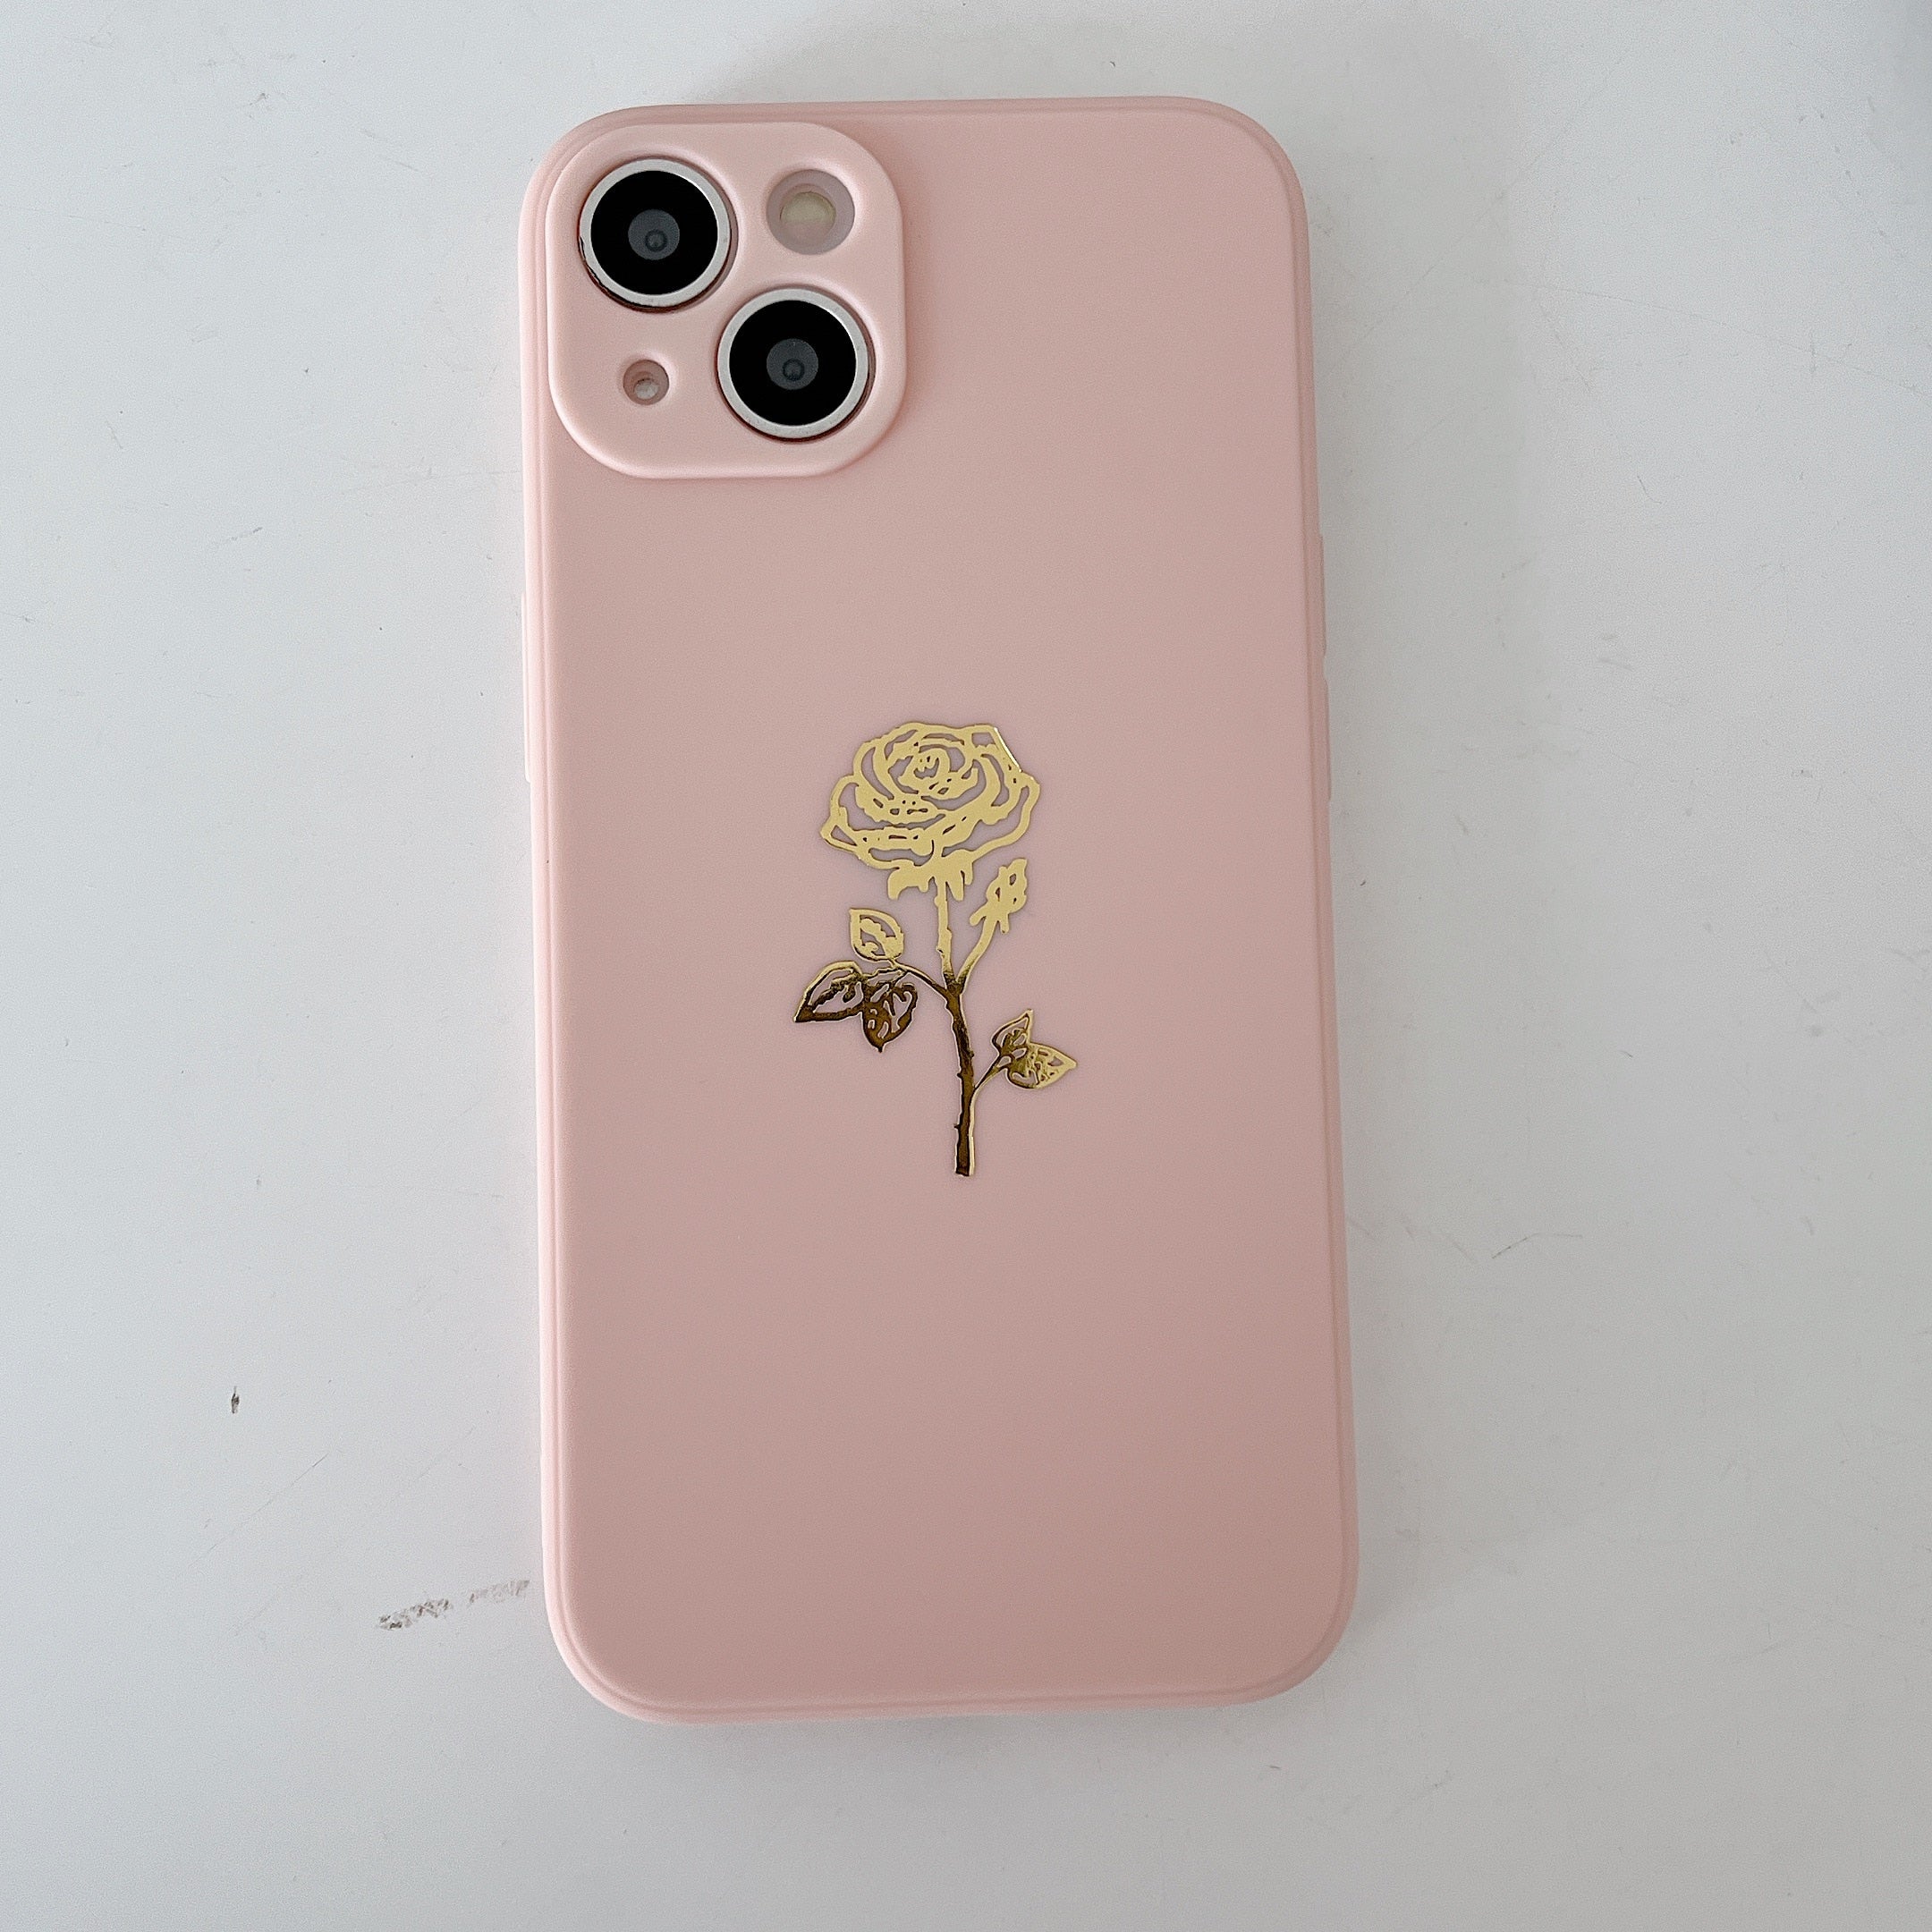 Silicone iPhone Case with Plated Rose Flower-Fonally-For iPhone 7 or 8-Pink-